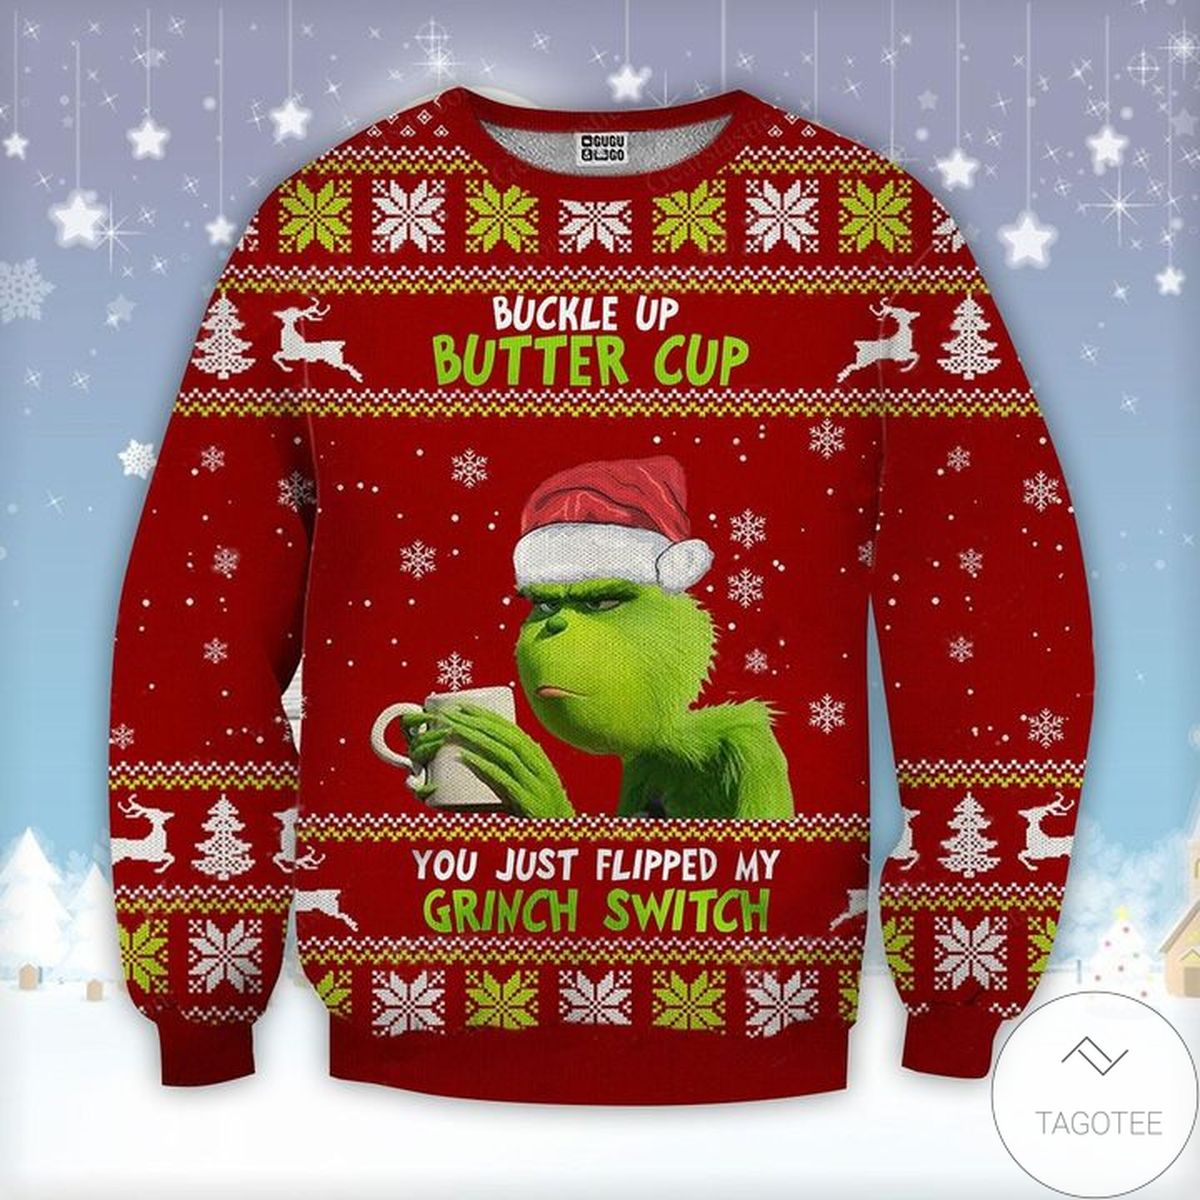 Buckle Up Buttercup You Just Flipped My Witch Switch Flinch Ugly Christmas Sweater